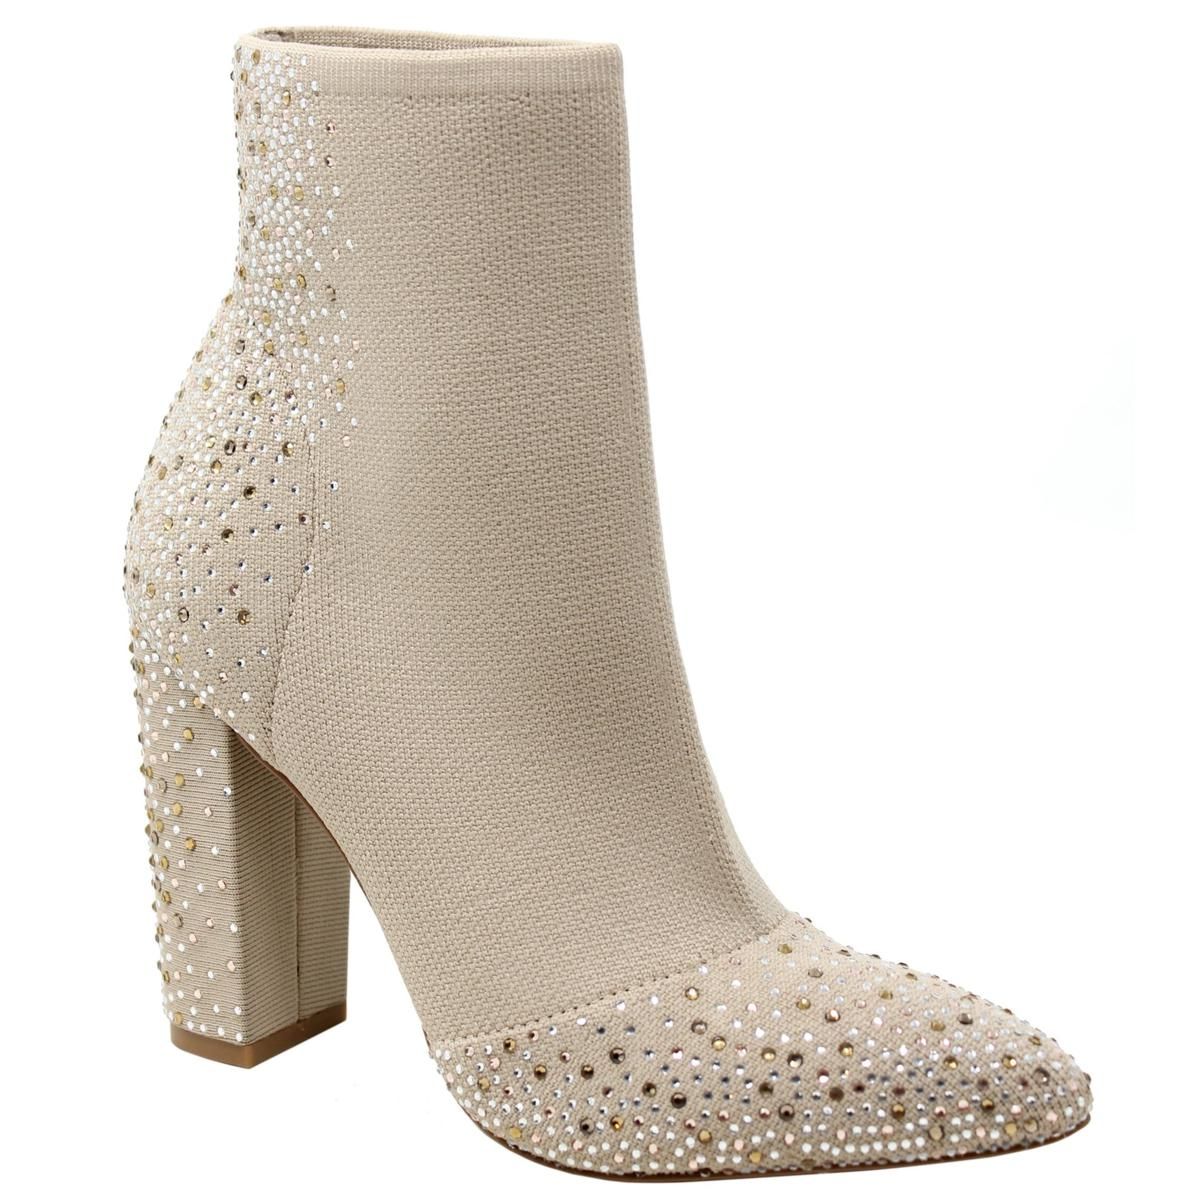 Charles By Charles David Popularity Stretch Knit Booties | HSN